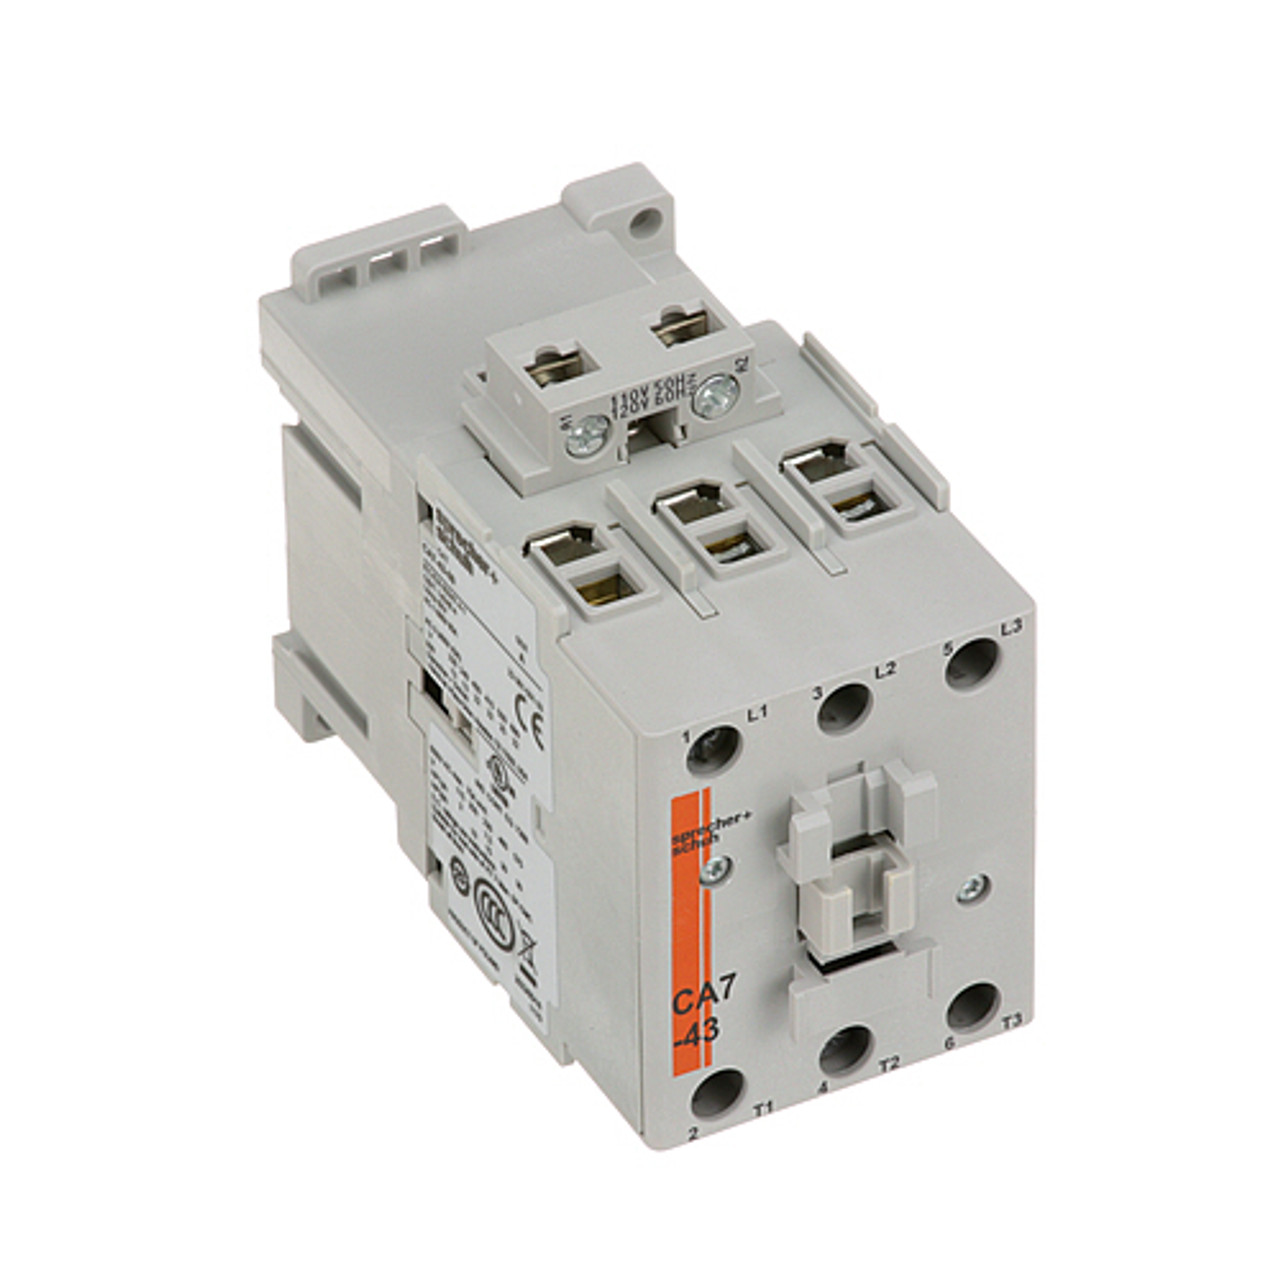 Contactor, Mech, 3-Pole - Replacement Part For Ultrafryer 18A283